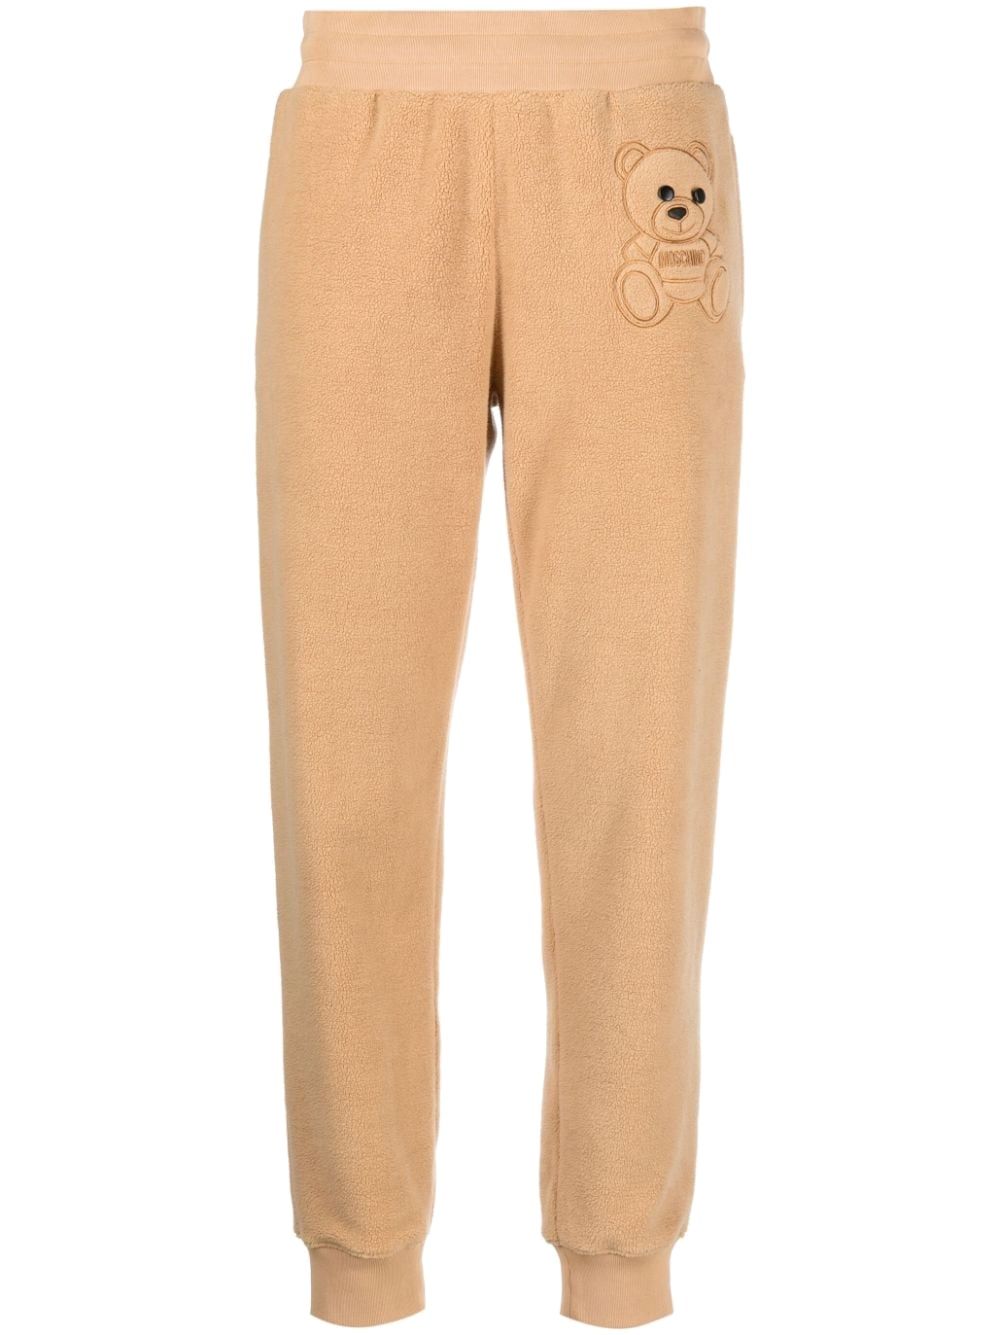 Cropped trousers with teddy bear detail